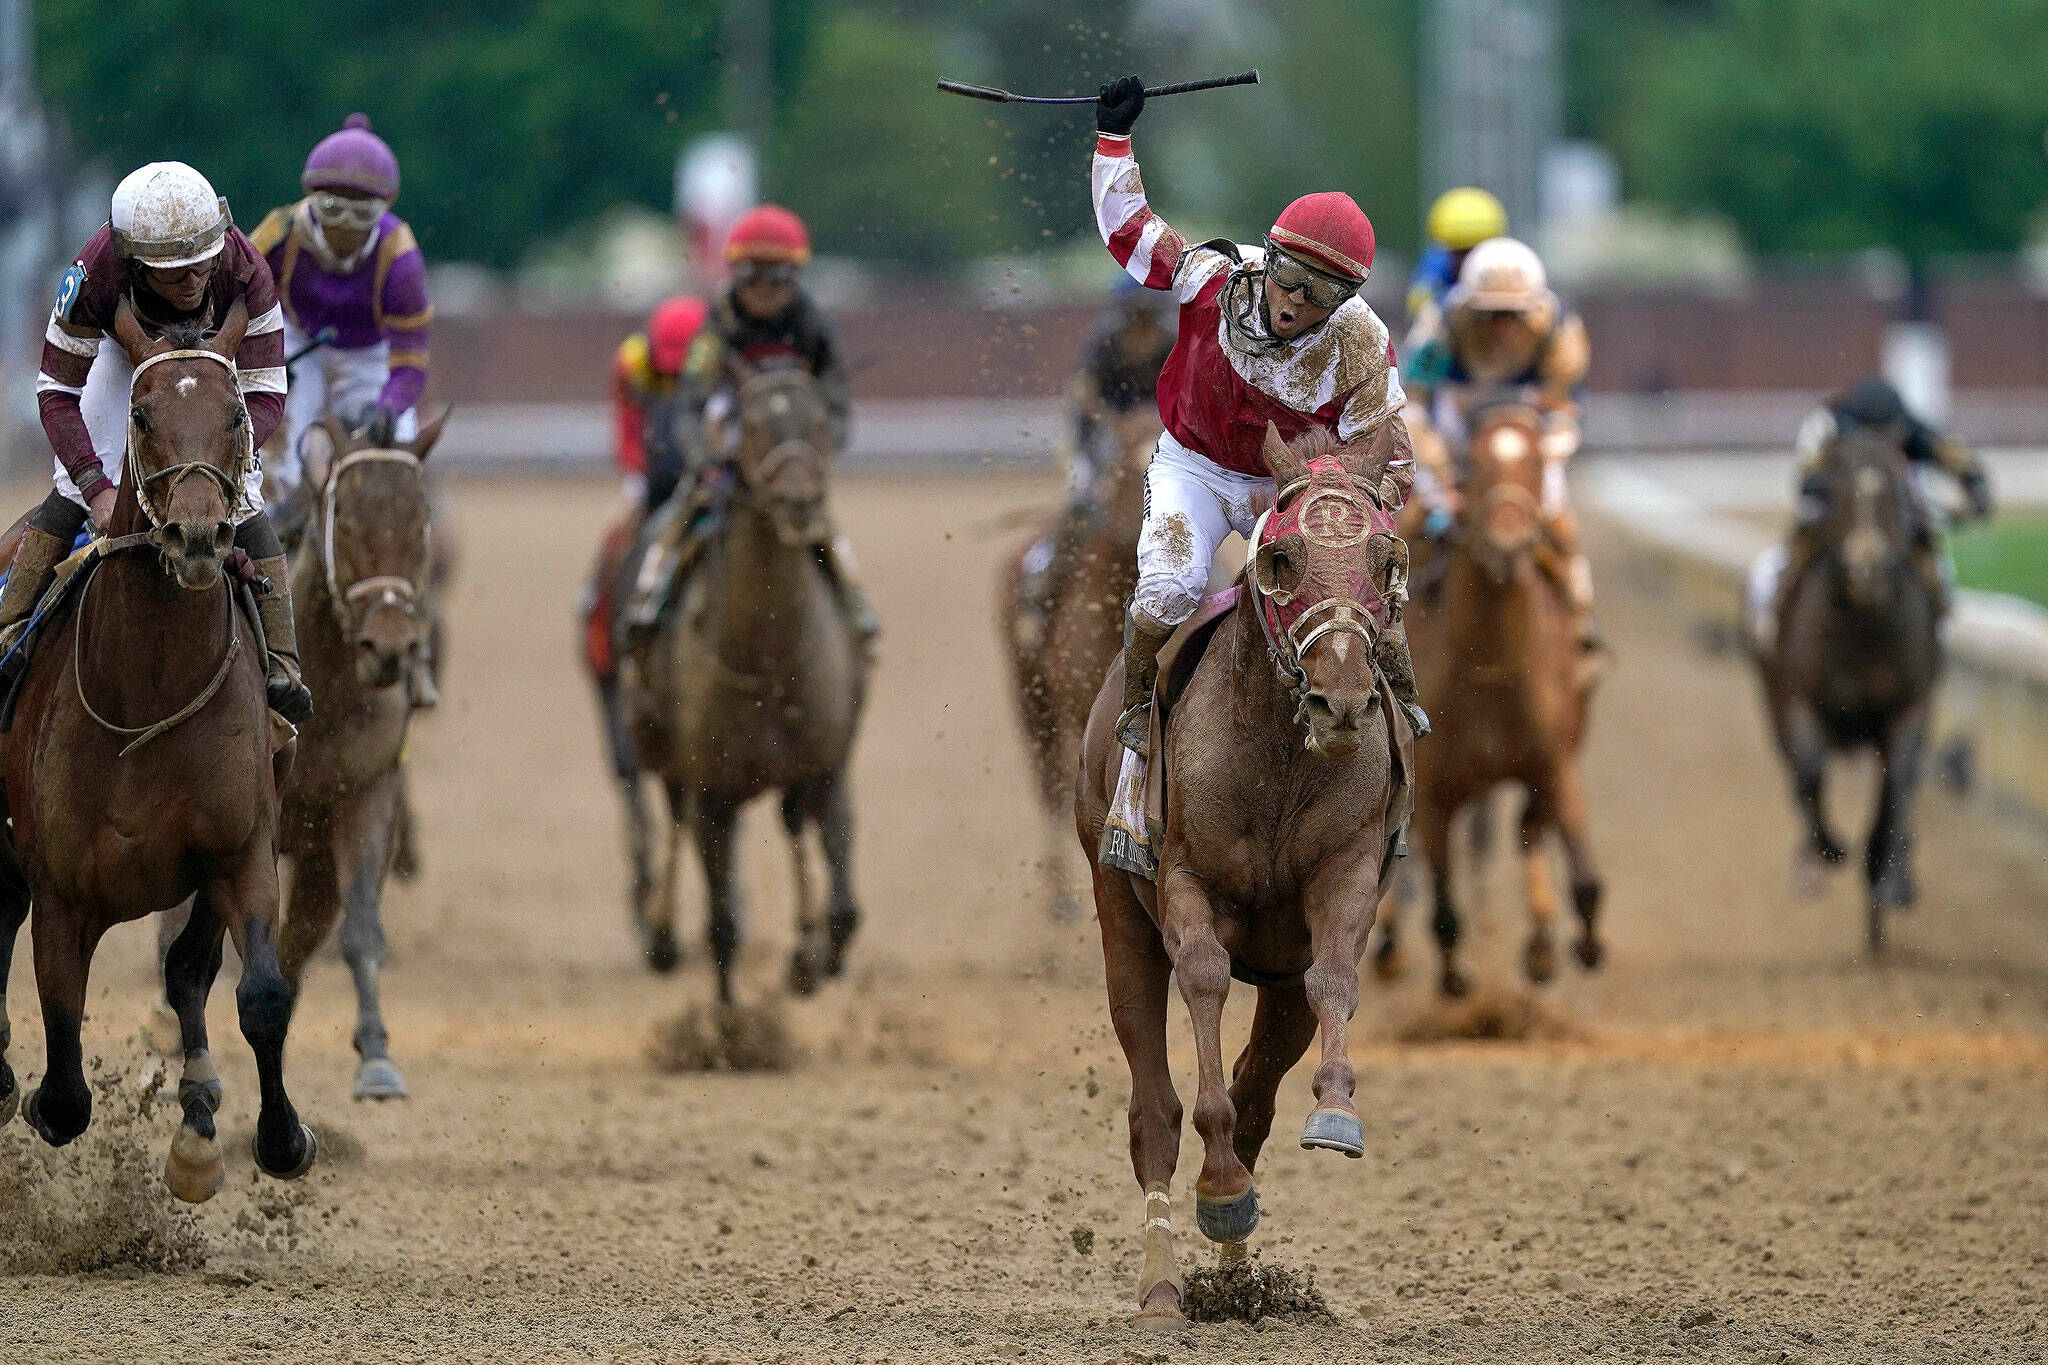 Sonny Leon celebrates after riding Rich Strike past the finish line to win the 148th running of the Kentucky Derby on Saturday at Churchill Downs in Louisville, Ky. (AP Photo/Charlie Neibergall)